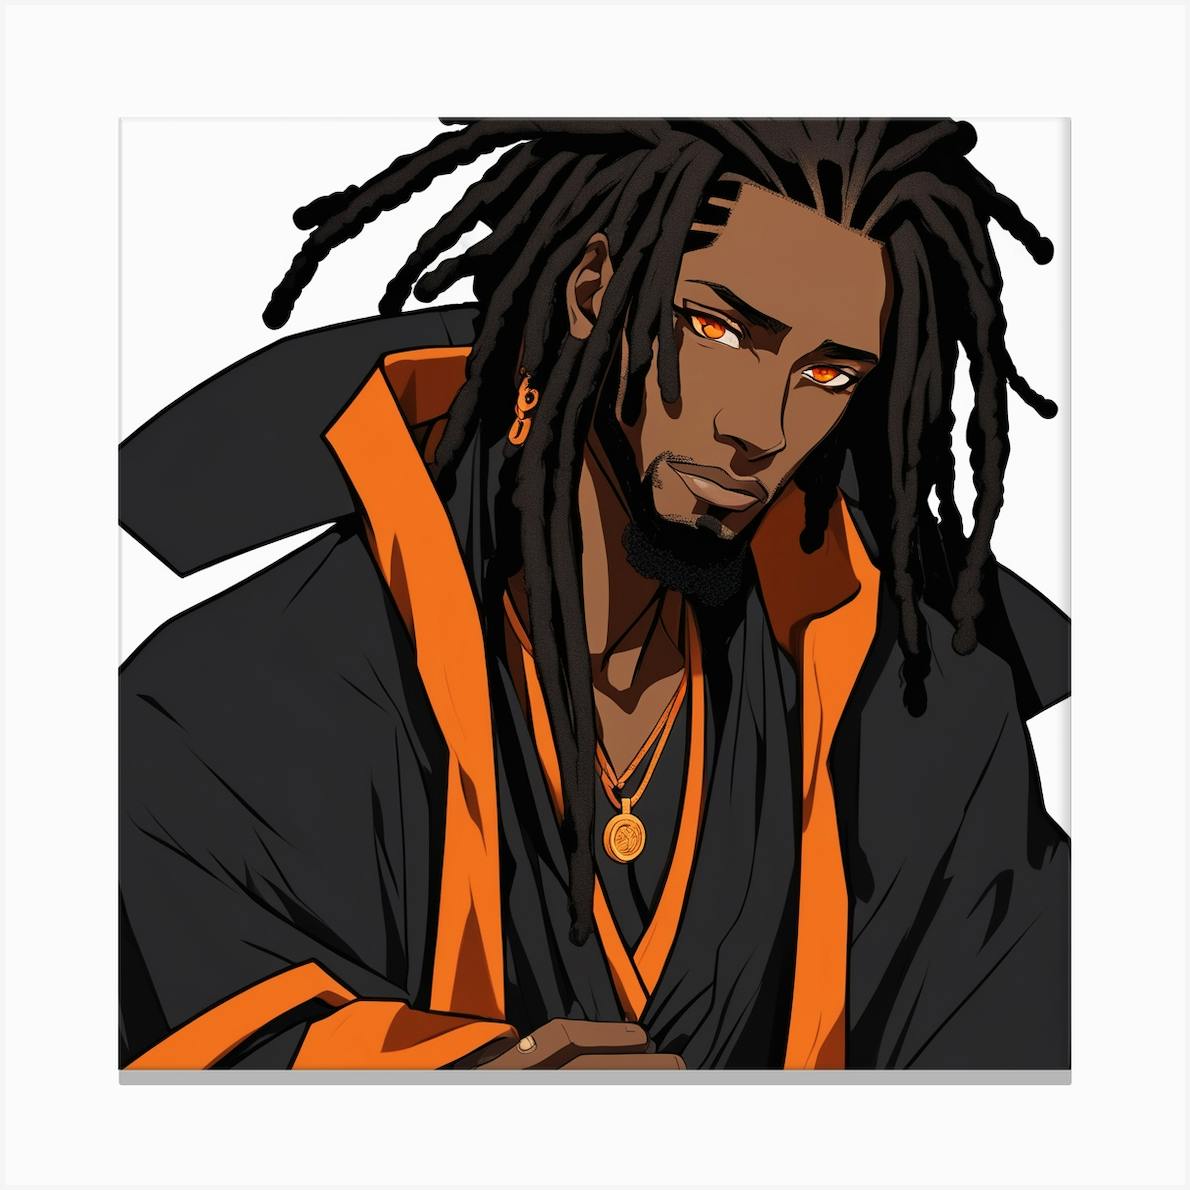 Anime character with dreads